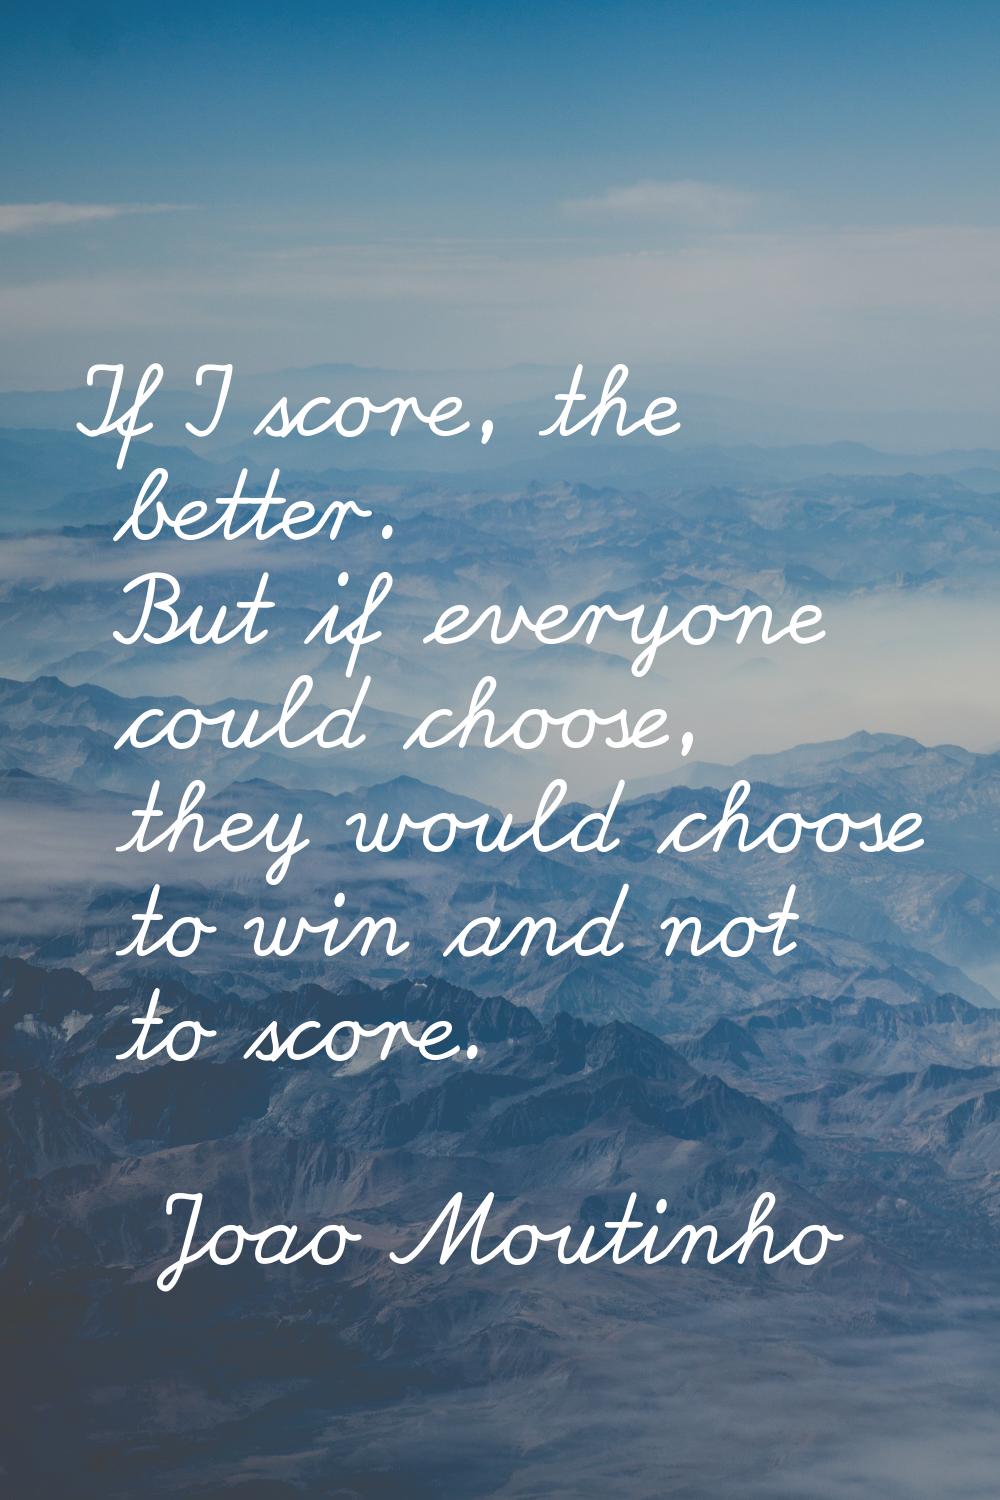 If I score, the better. But if everyone could choose, they would choose to win and not to score.